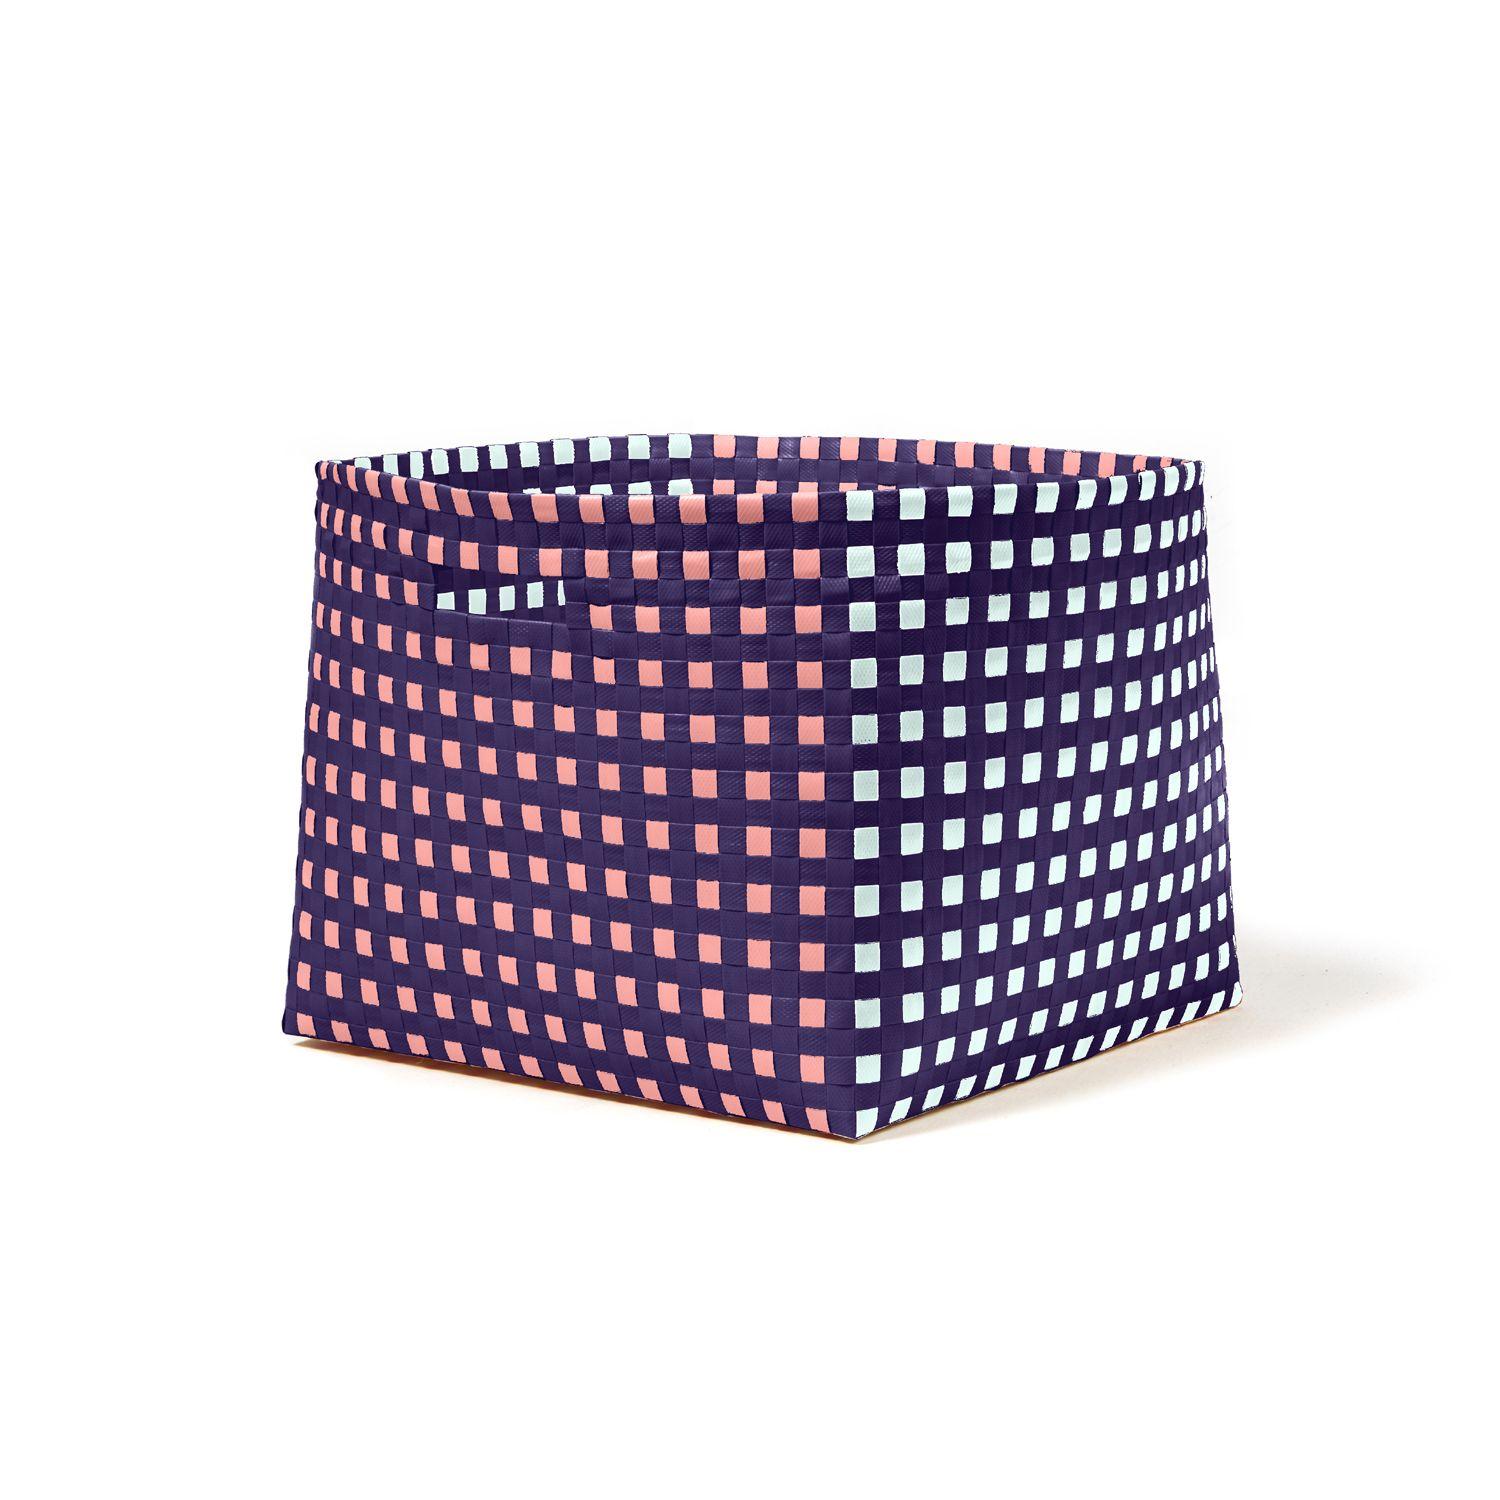 Sunchos paper bin by Pauline Deltour
Materials: 100% recycled Polypropylene
Dimensions: D 22 x W 22 x H 30 cm 
Available in colors: salmon/ lilac/ turquoise, black/ white, orange/ beige/ pink. Available in other sizes.

The Suncho box is a